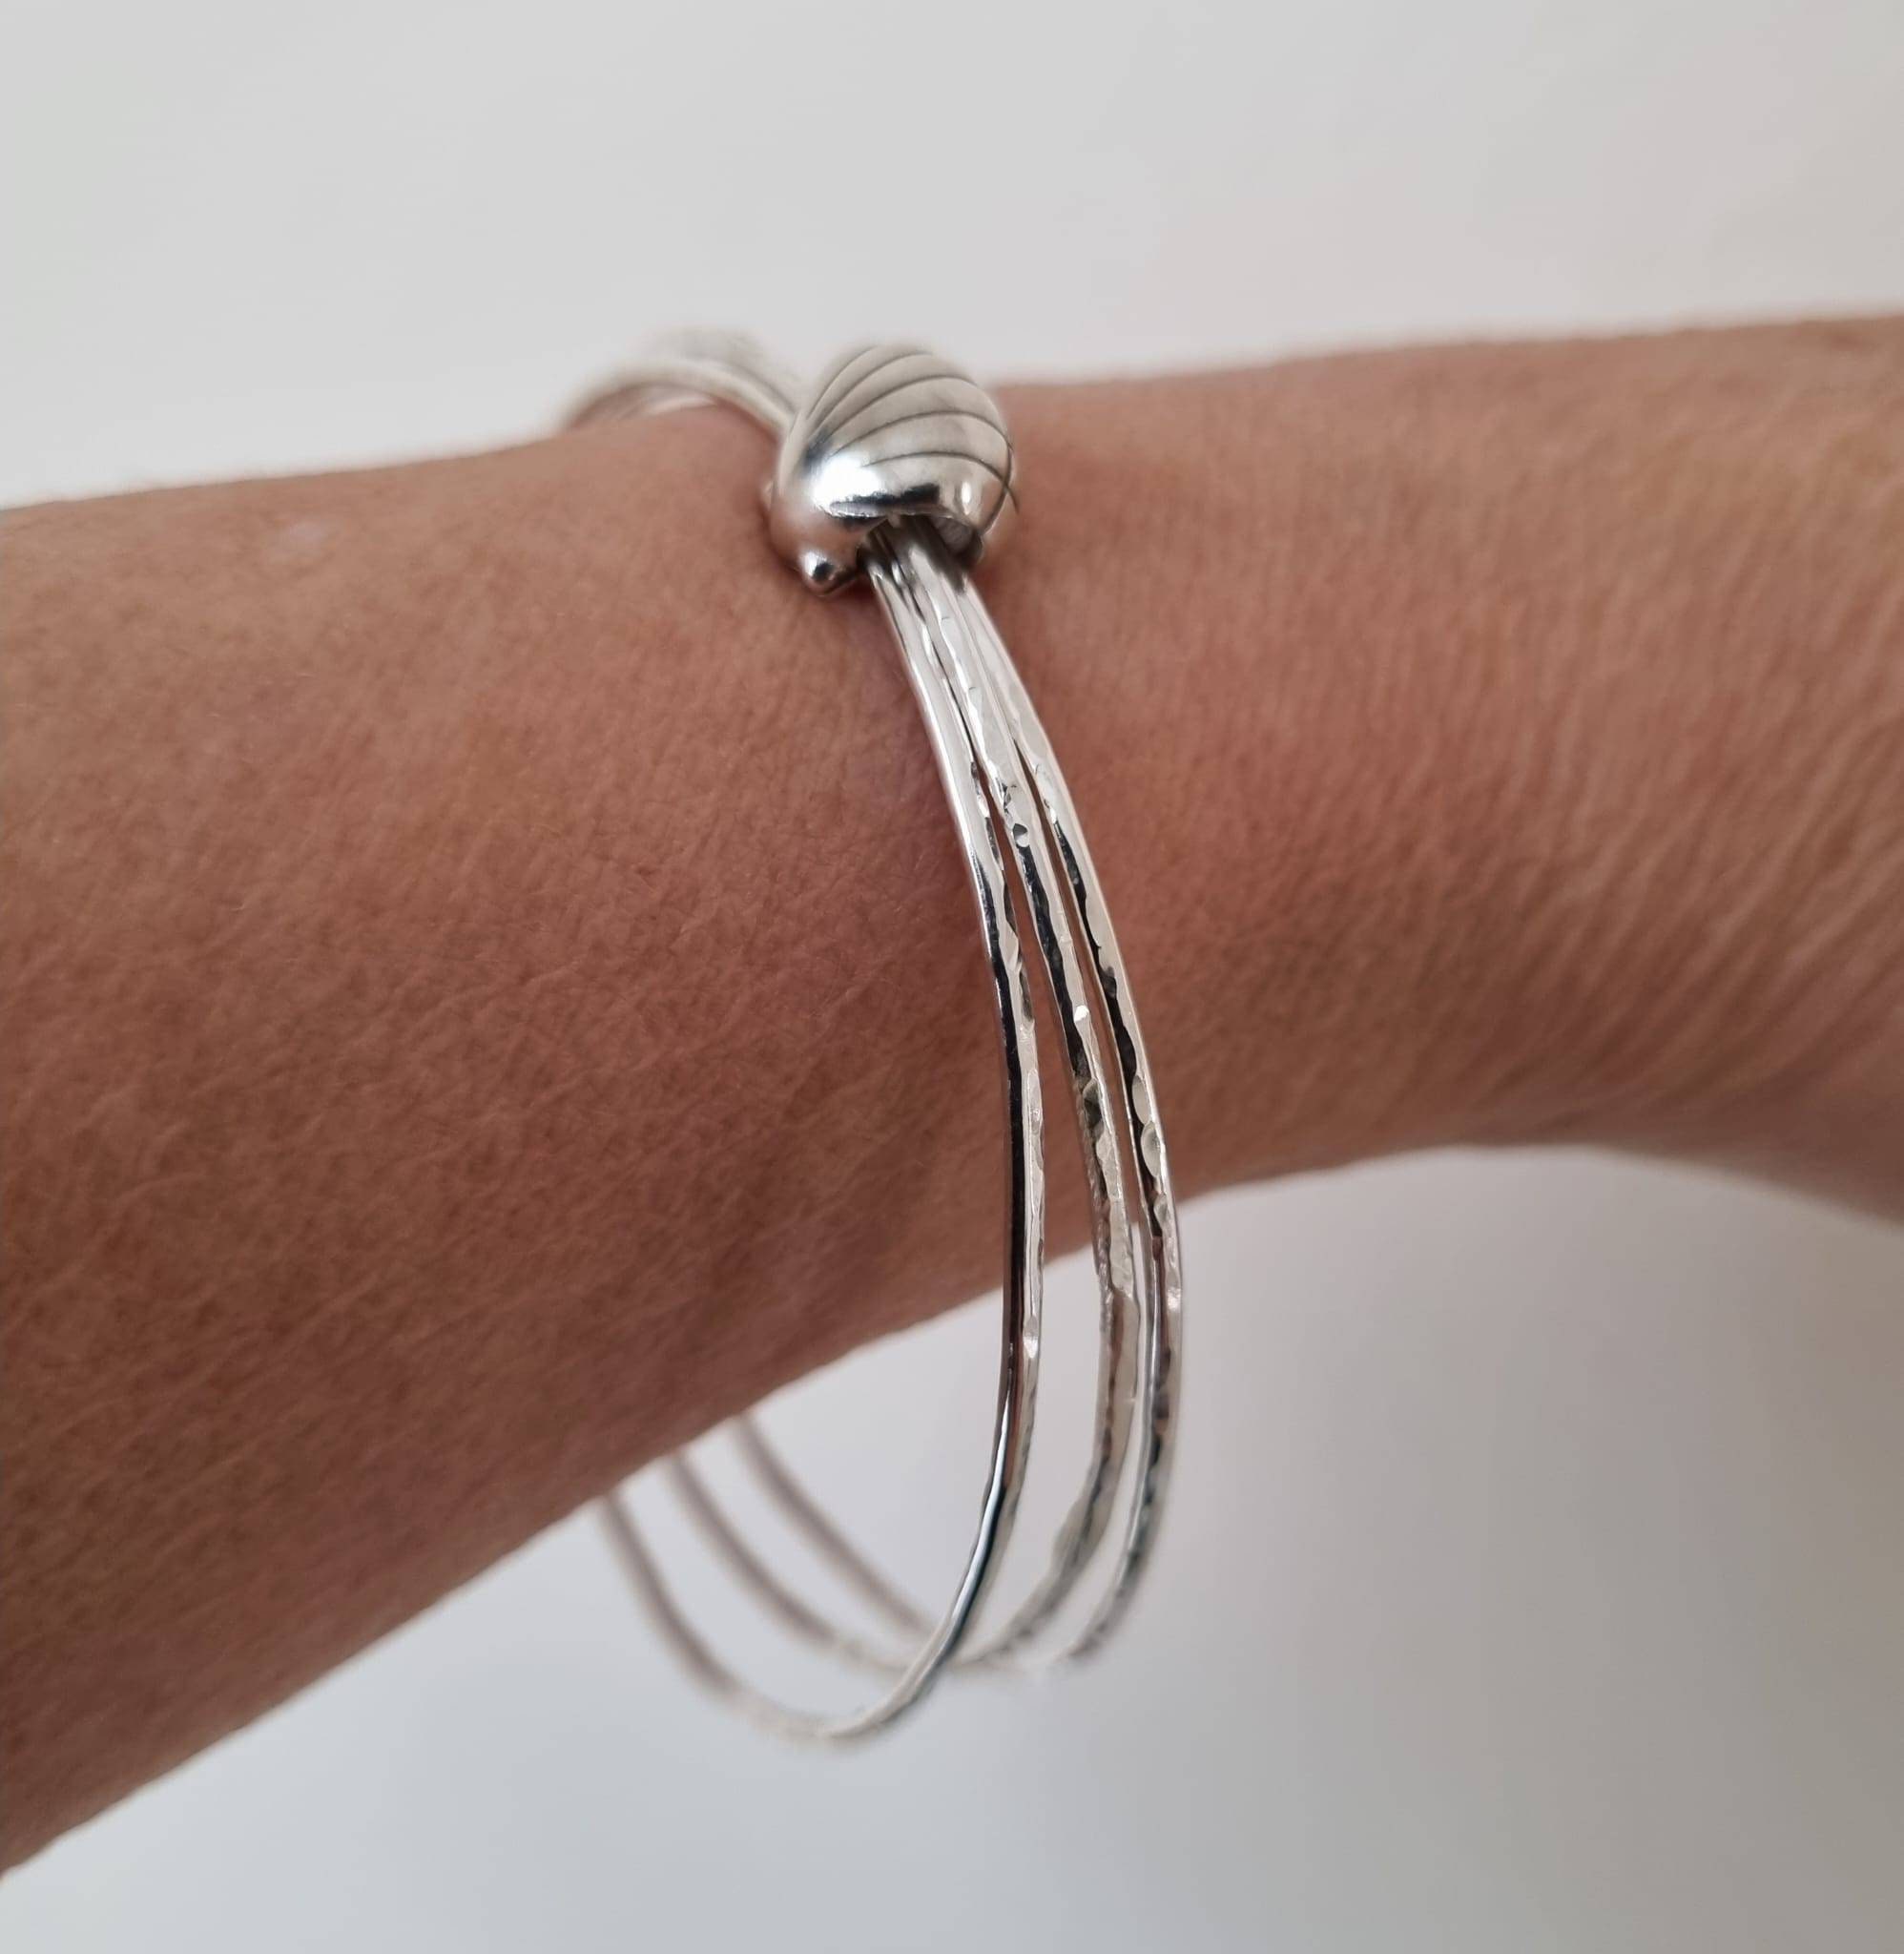 Sterling Silver Bangle Trio With Shell Keeper Bead, Hammered Bangles, Stacking Handmade in The Uk, Postal Gifts